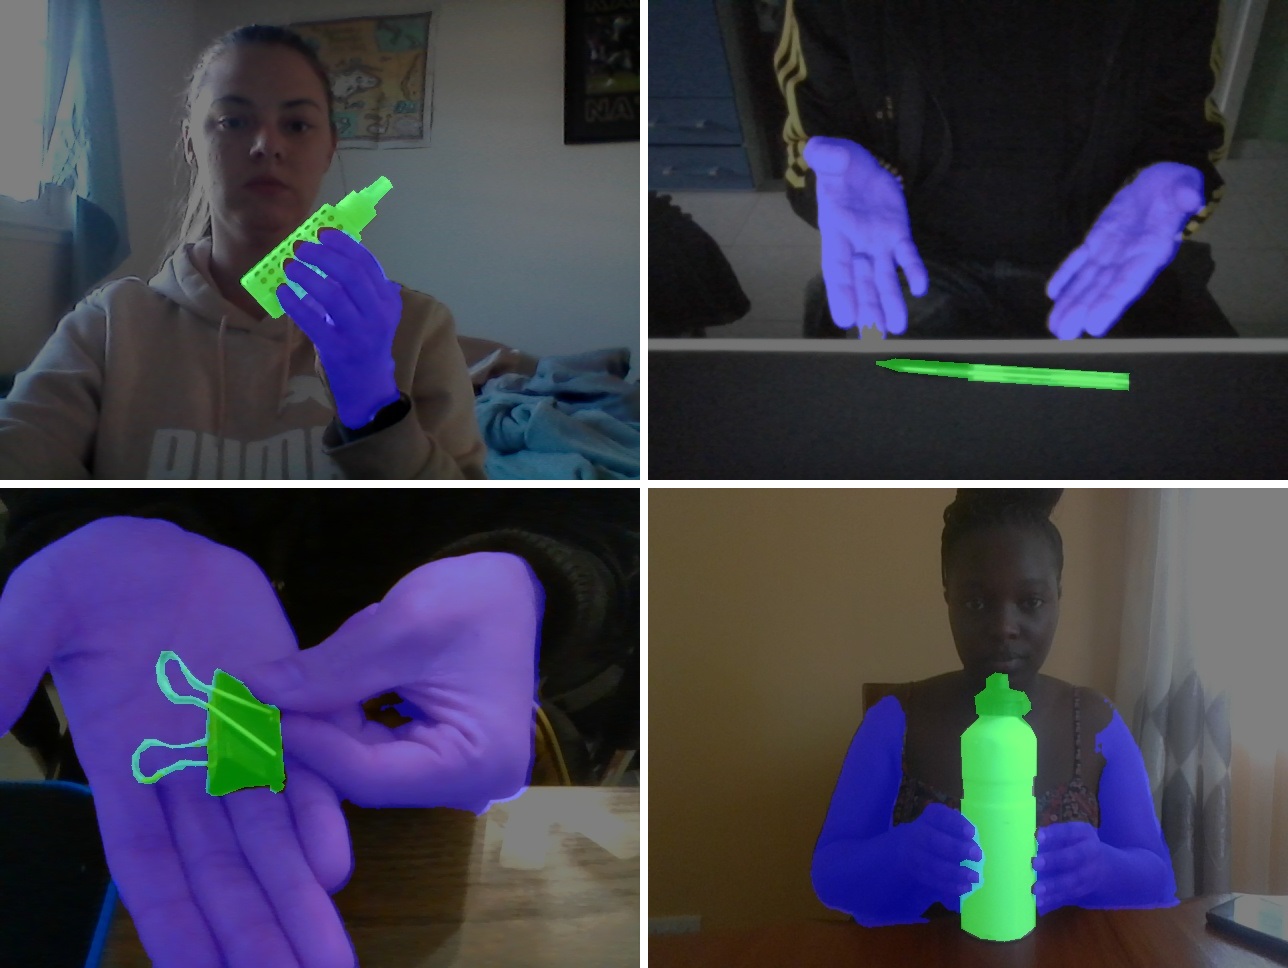 HuTics. In each image of the HuTics custom data set, the users’ hands are visualized in blue and the object in green. HuTics is used to train a machine learning model. ©2022 Yatani and Zhou